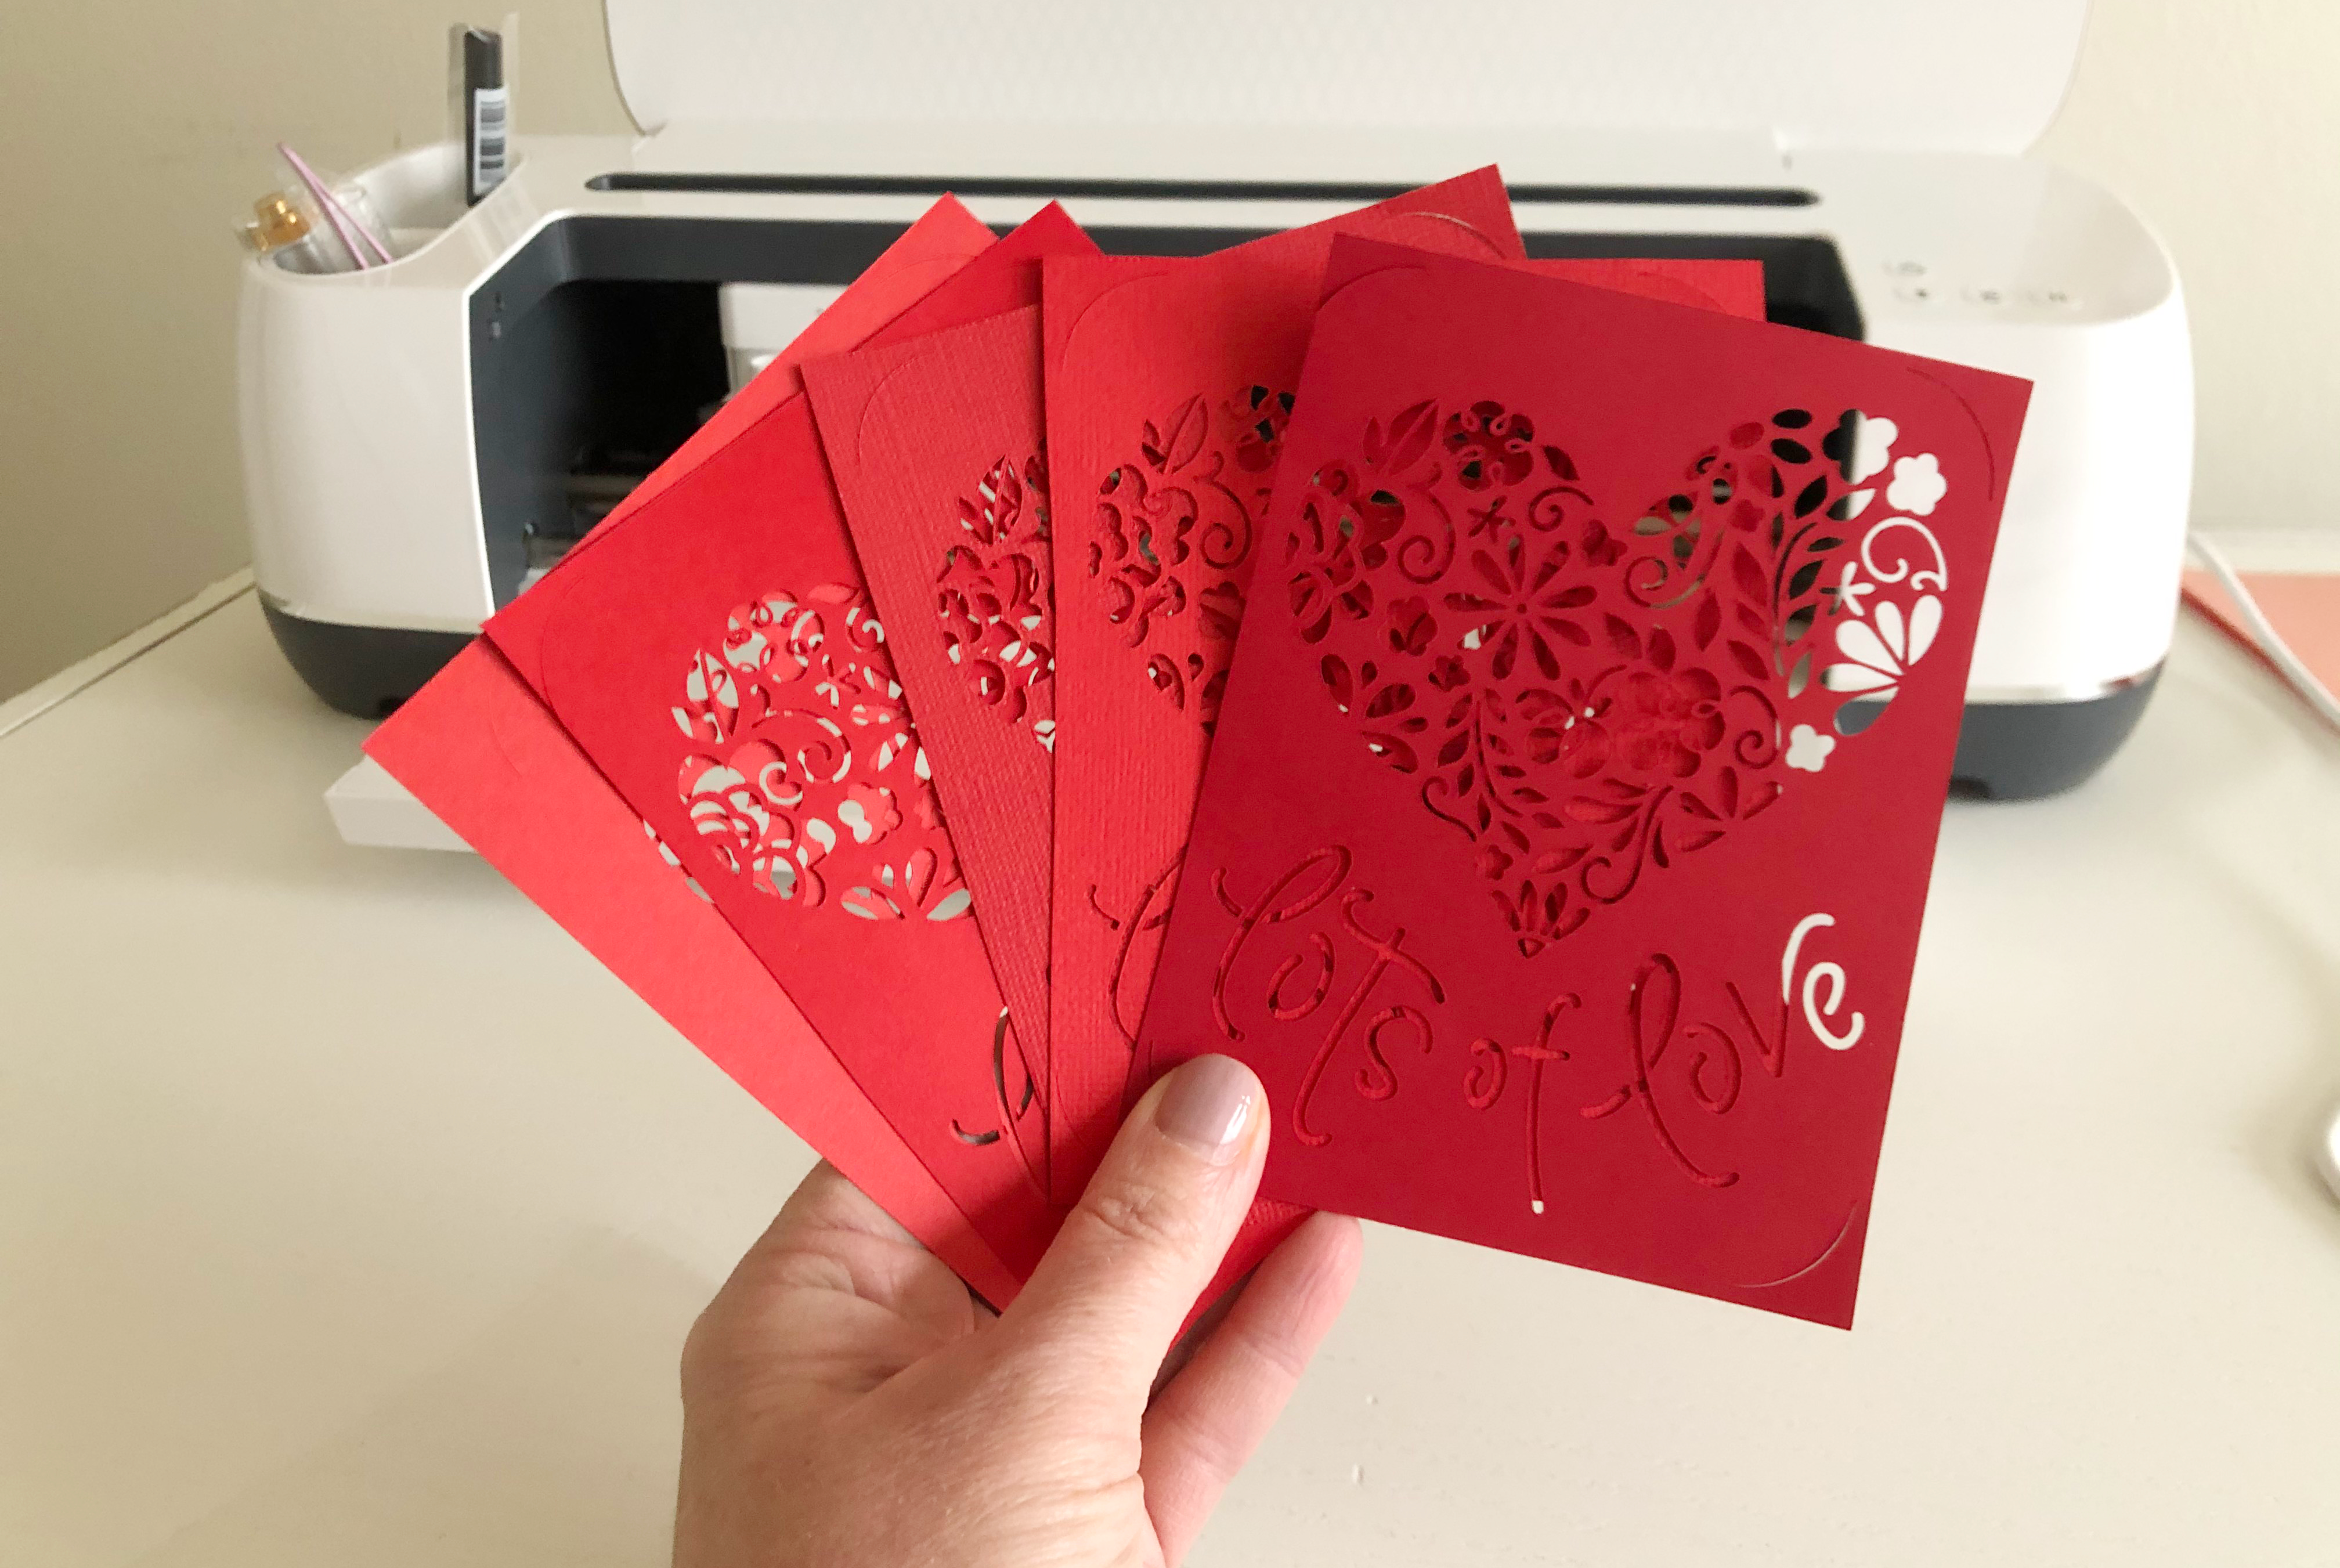 How to clean a Cricut mat before crafting your Valentine's Day card